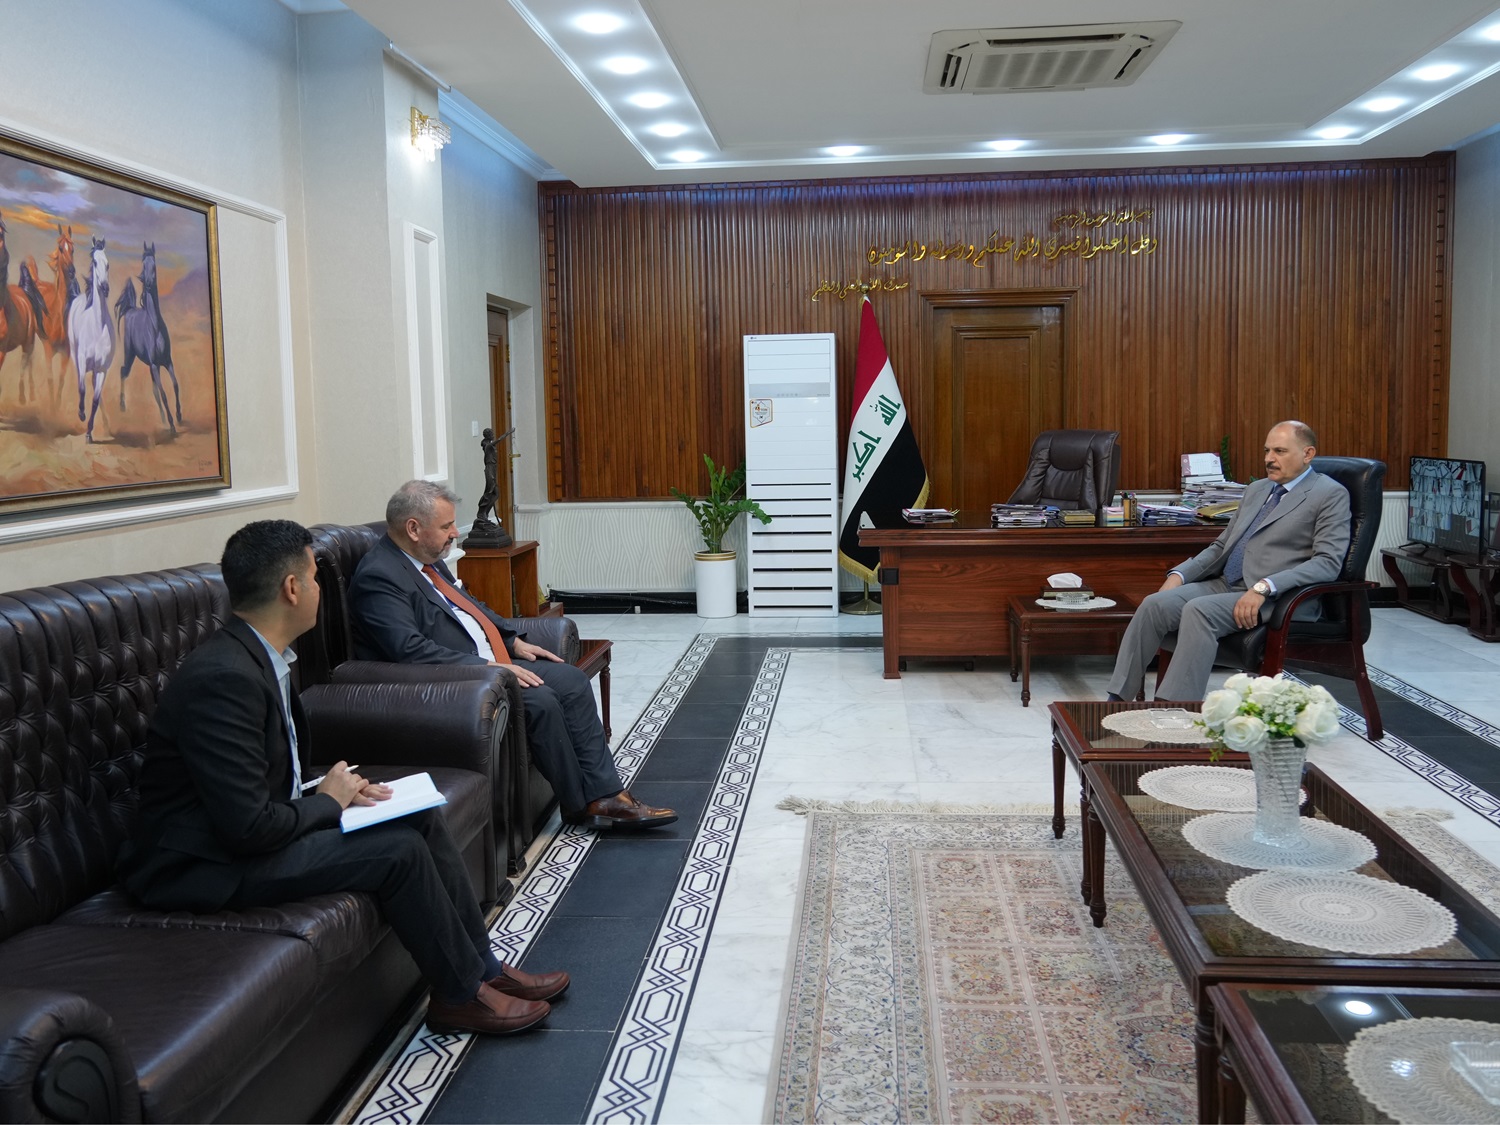 The President of the Federal Supreme Court receives the Ambassador of the European Union in Iraq